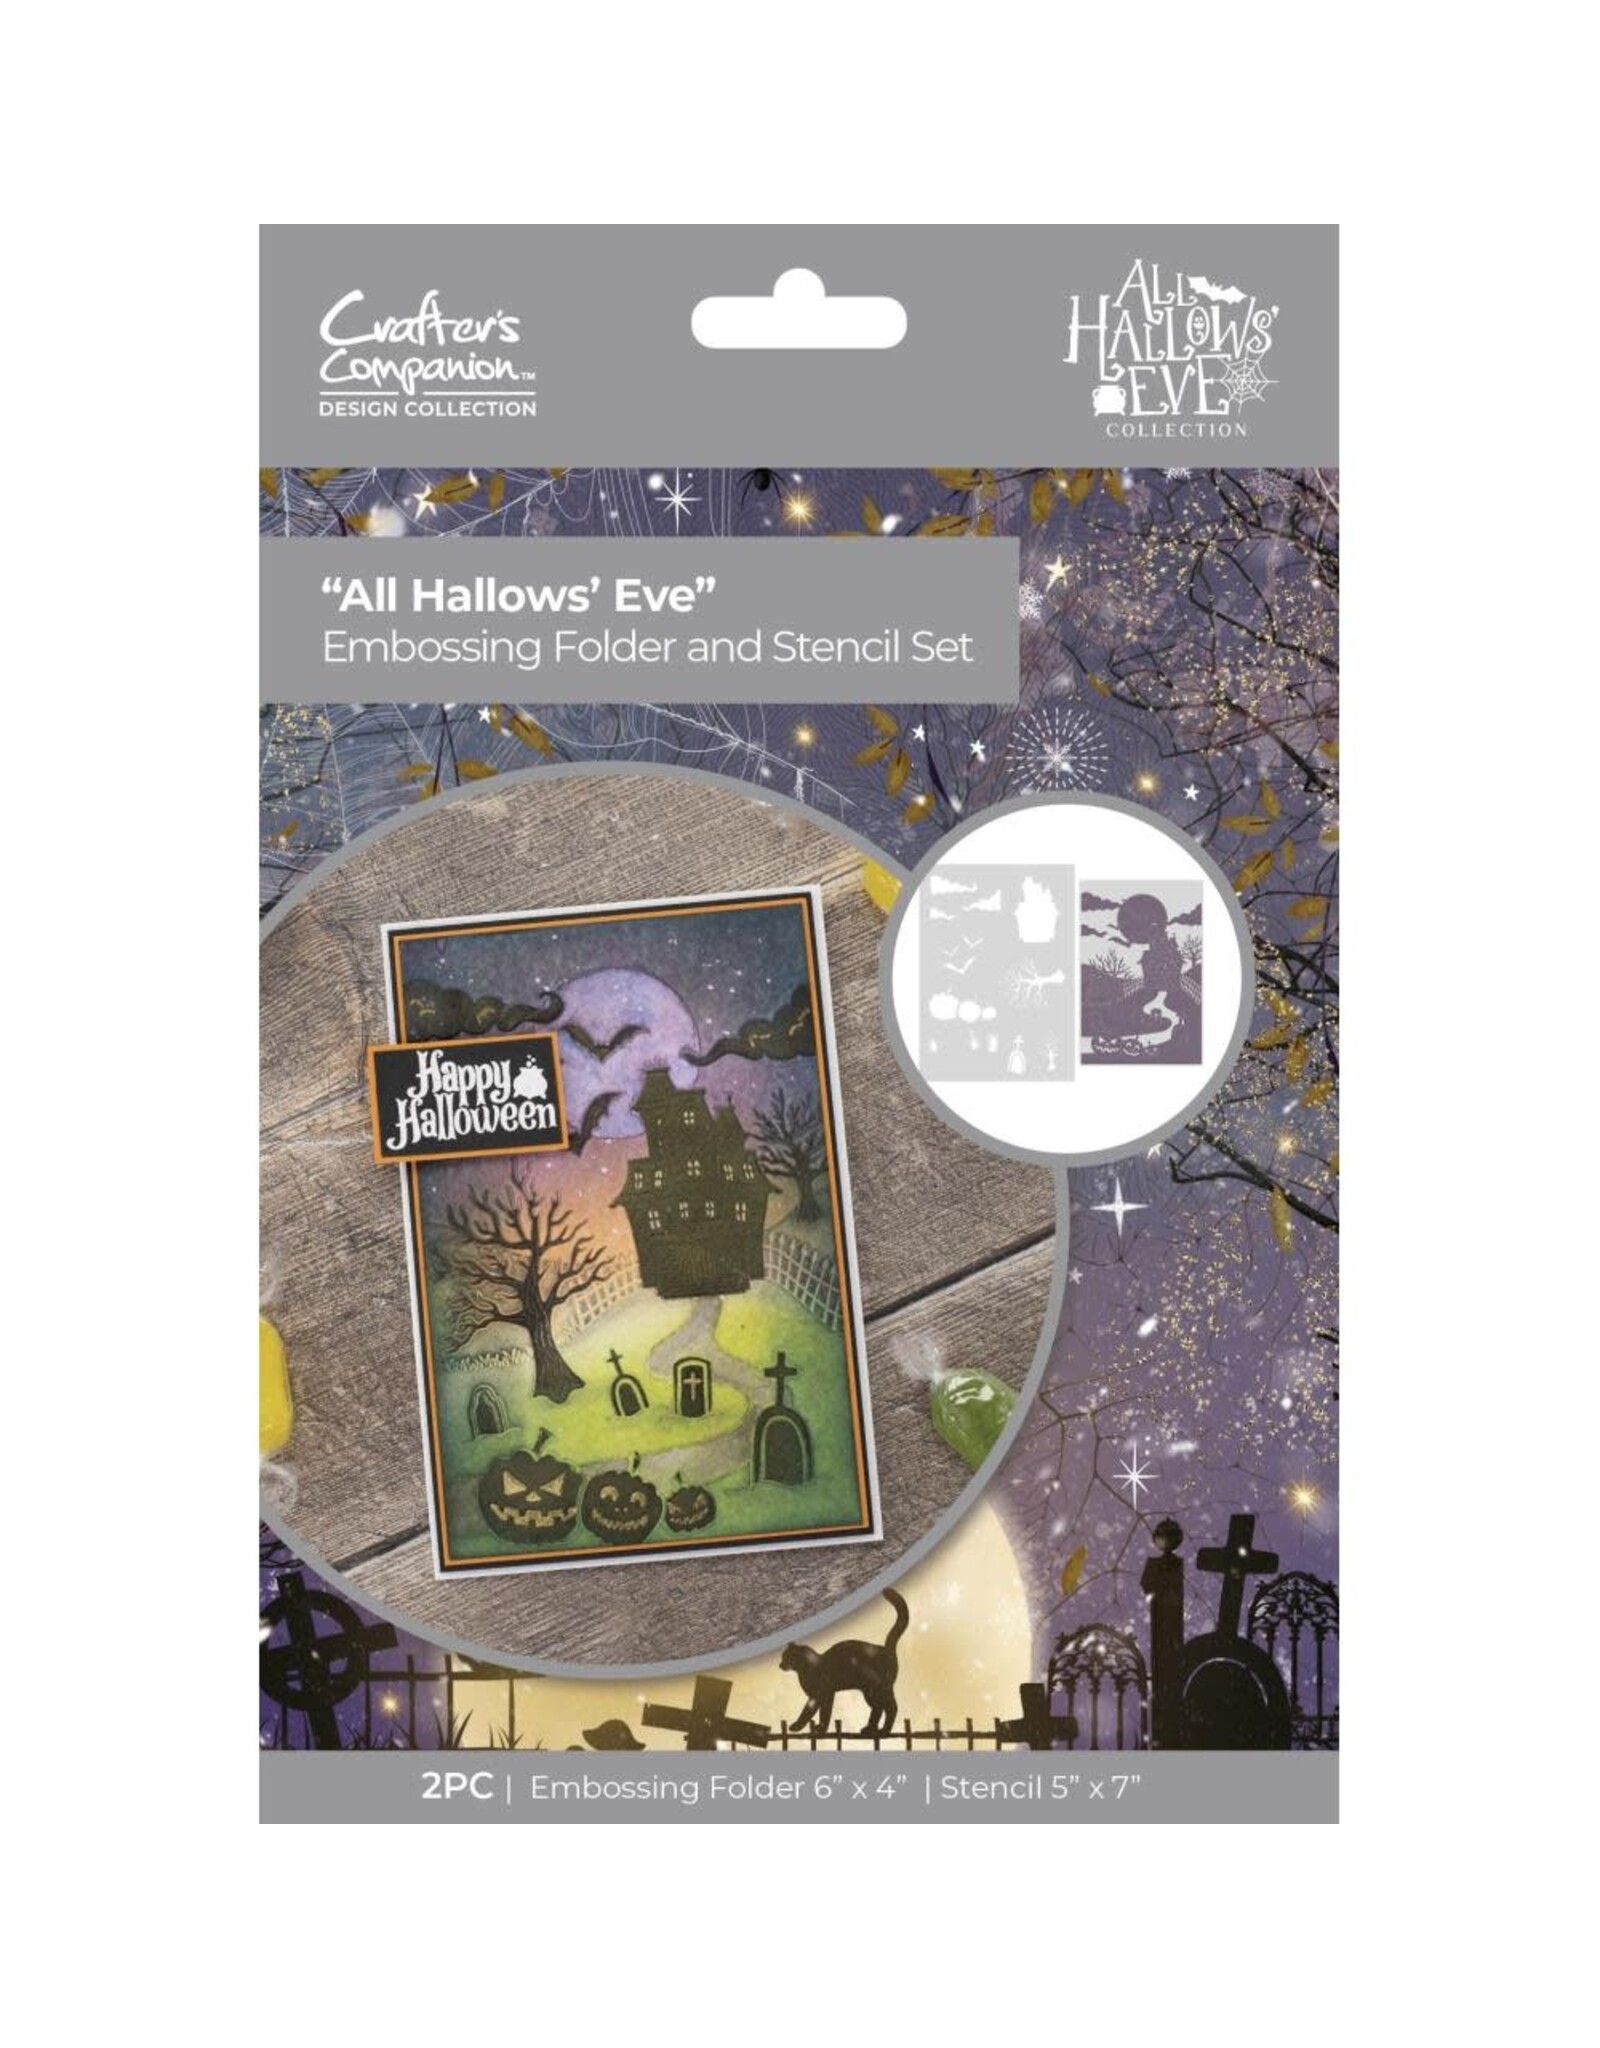 CRAFTERS COMPANION CRAFTERS COMPANION ALL HALLOWS' EVE COLLECTION ALL HALLOWS' EVE EMBOSSING FOLDER AND STENCIL SET